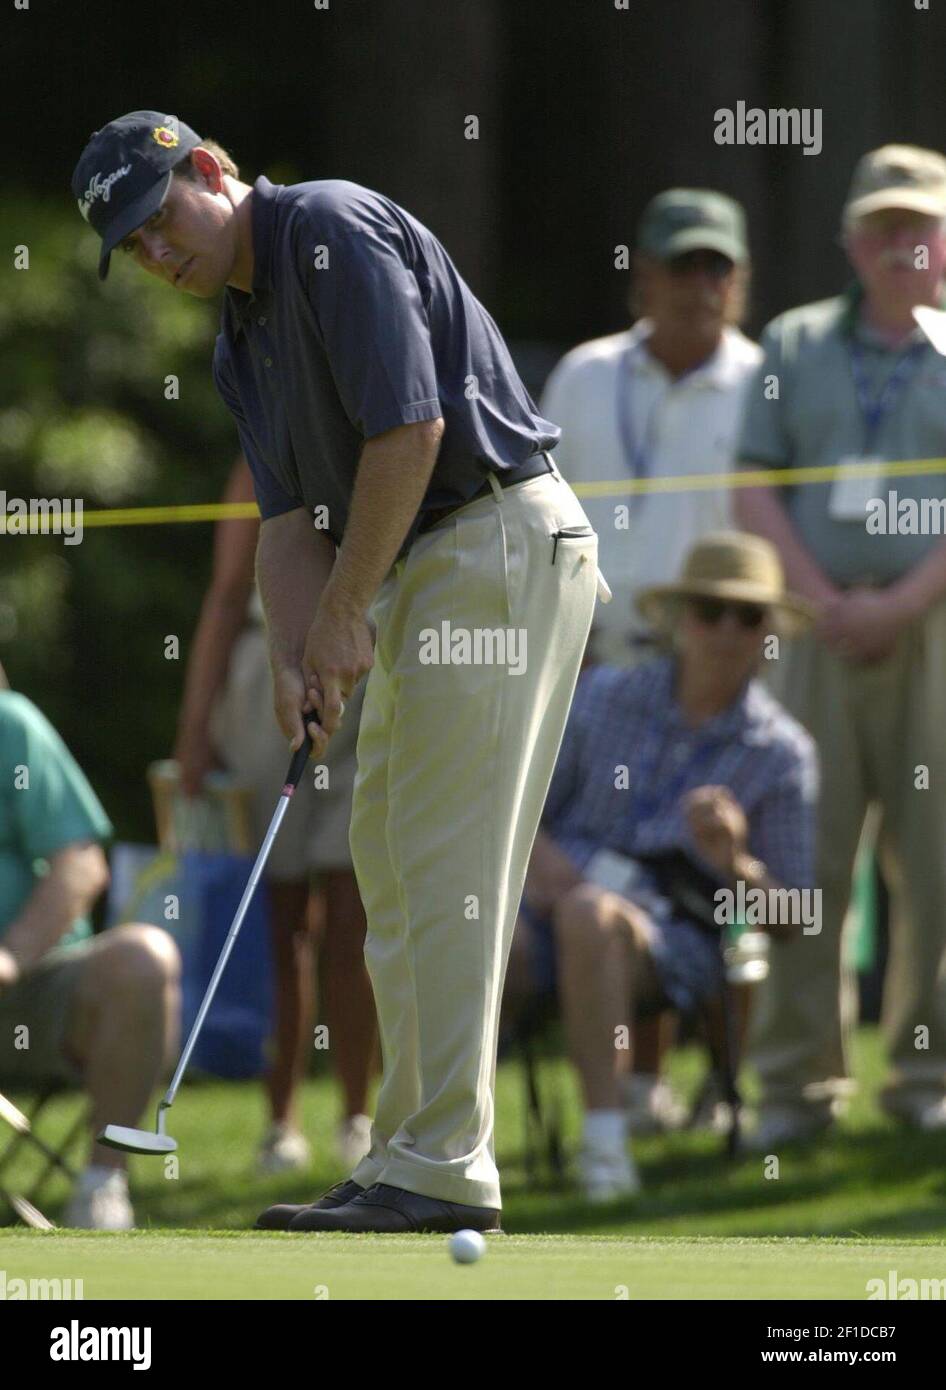 KRT SPORTS STORY SLUGGED: WORLDCOM KRT PHOTOGRAPH BY RICH GLICKSTEIN/THE  STATE (April 19) HILTON HEAD, SC - Jason Leonard watches his par put just  as it's about to fall on the eighth